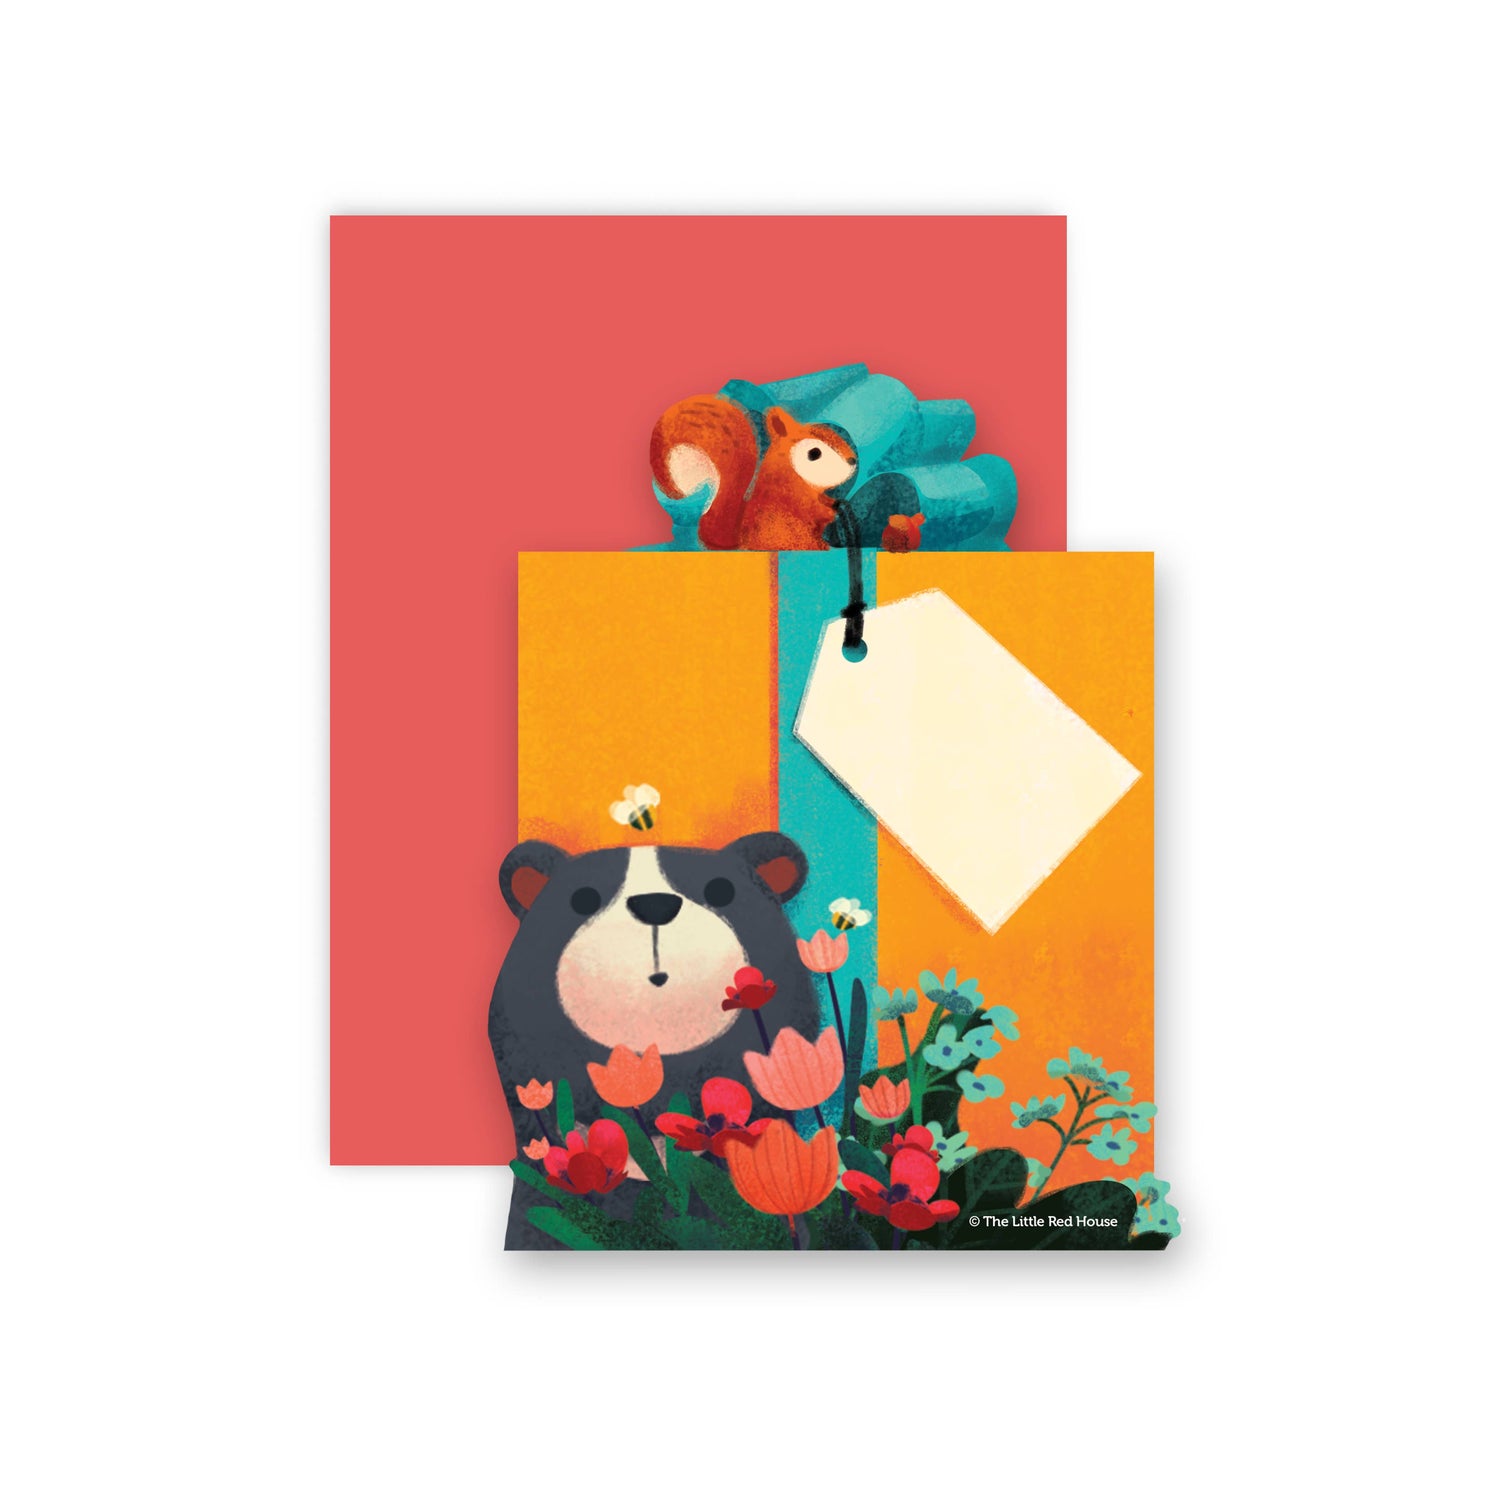 Bear, squirrel gift die cut card with red envelope, by Little Red House